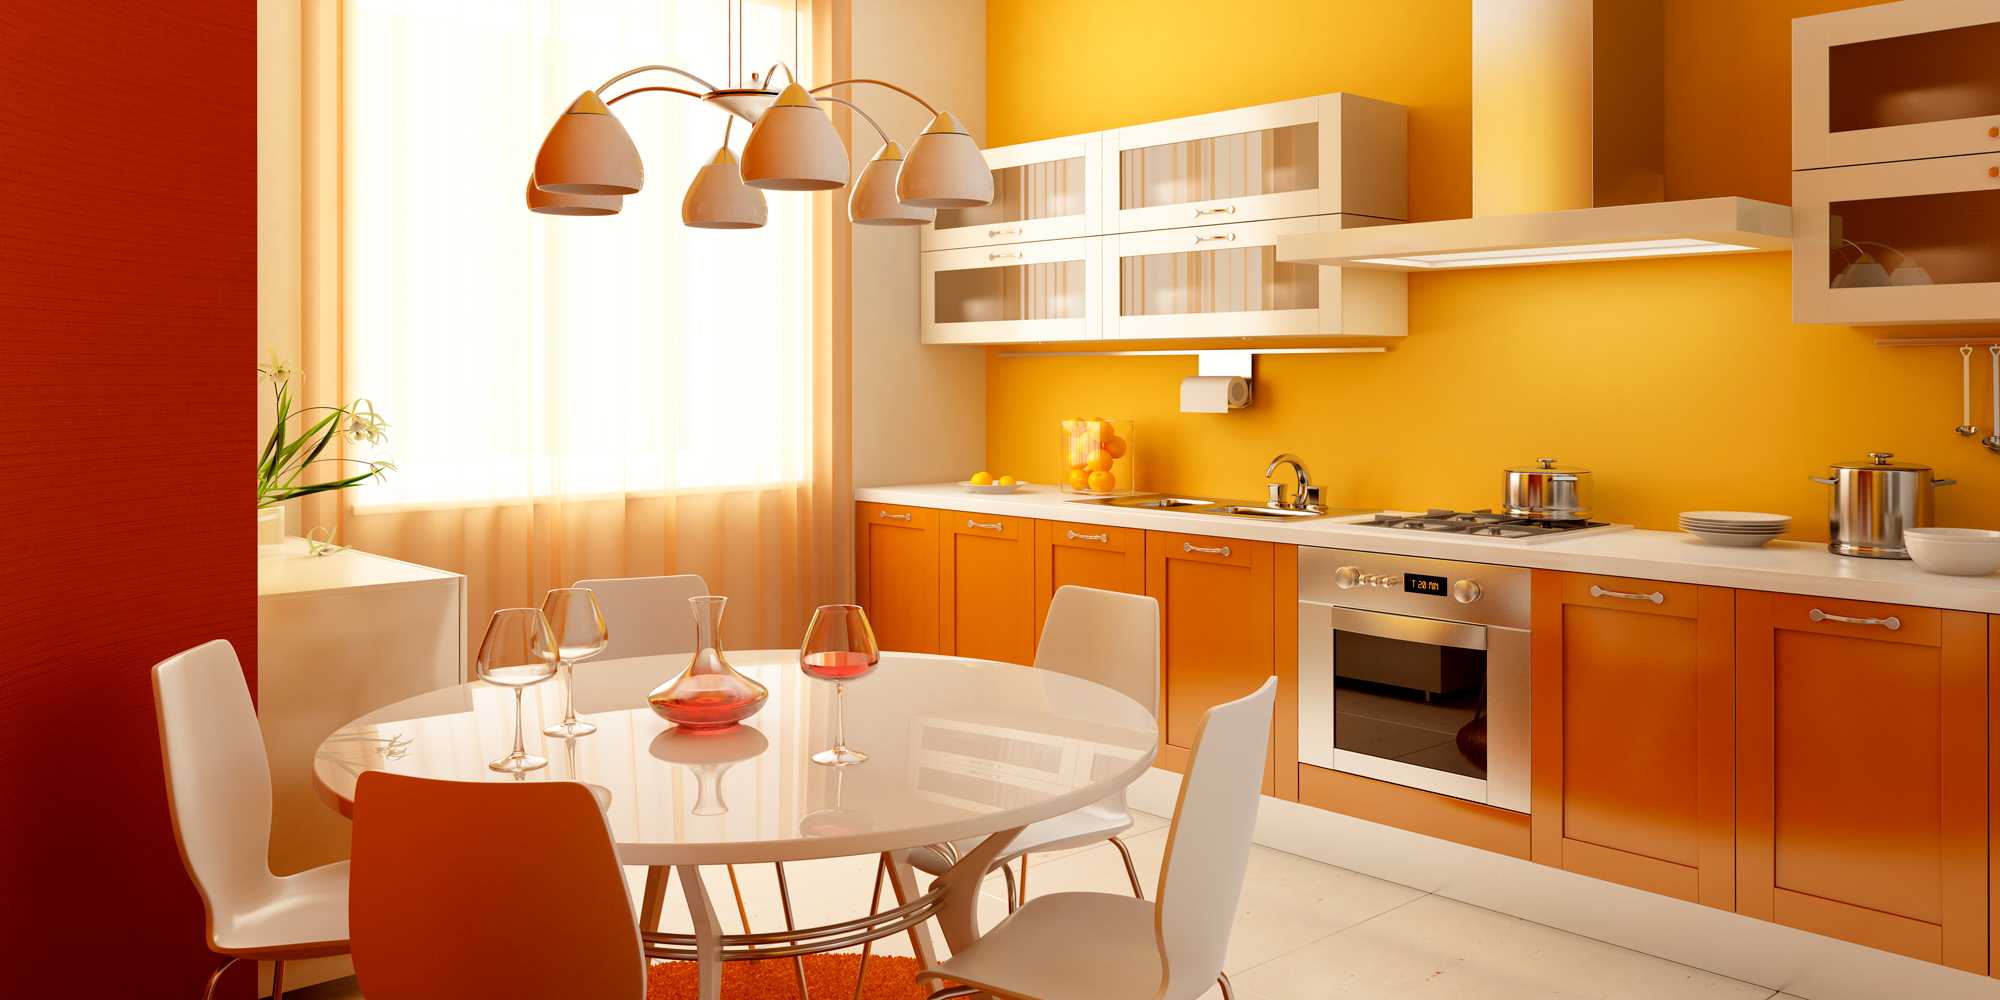 a combination of bright orange in the style of the bedroom with other colors